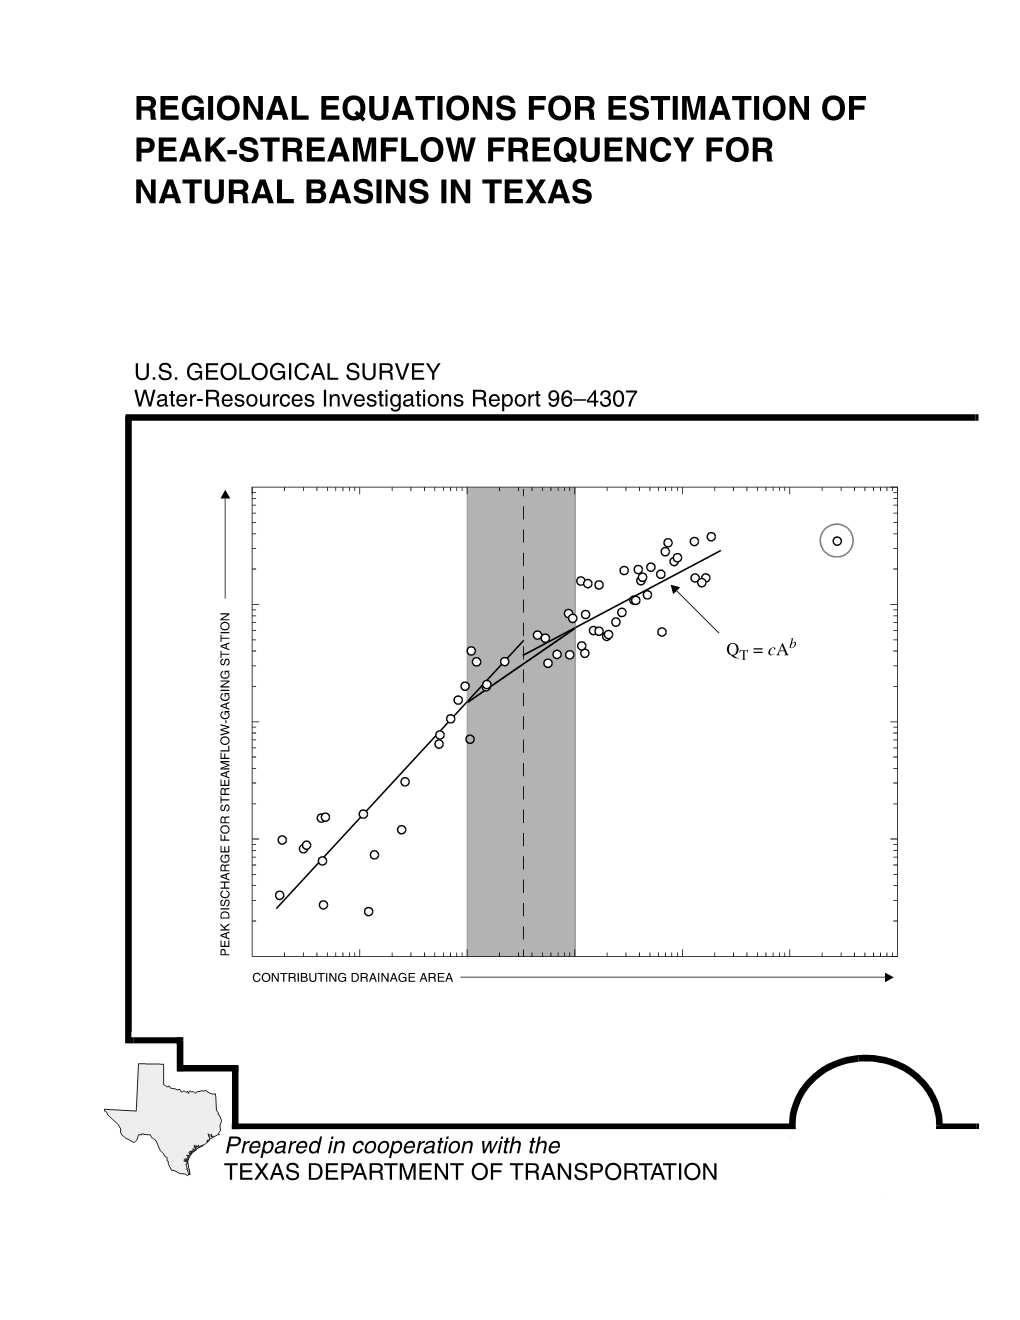 Regional Equations for Estimation of Peak-Streamflow Frequency for Natural Basins in Texas